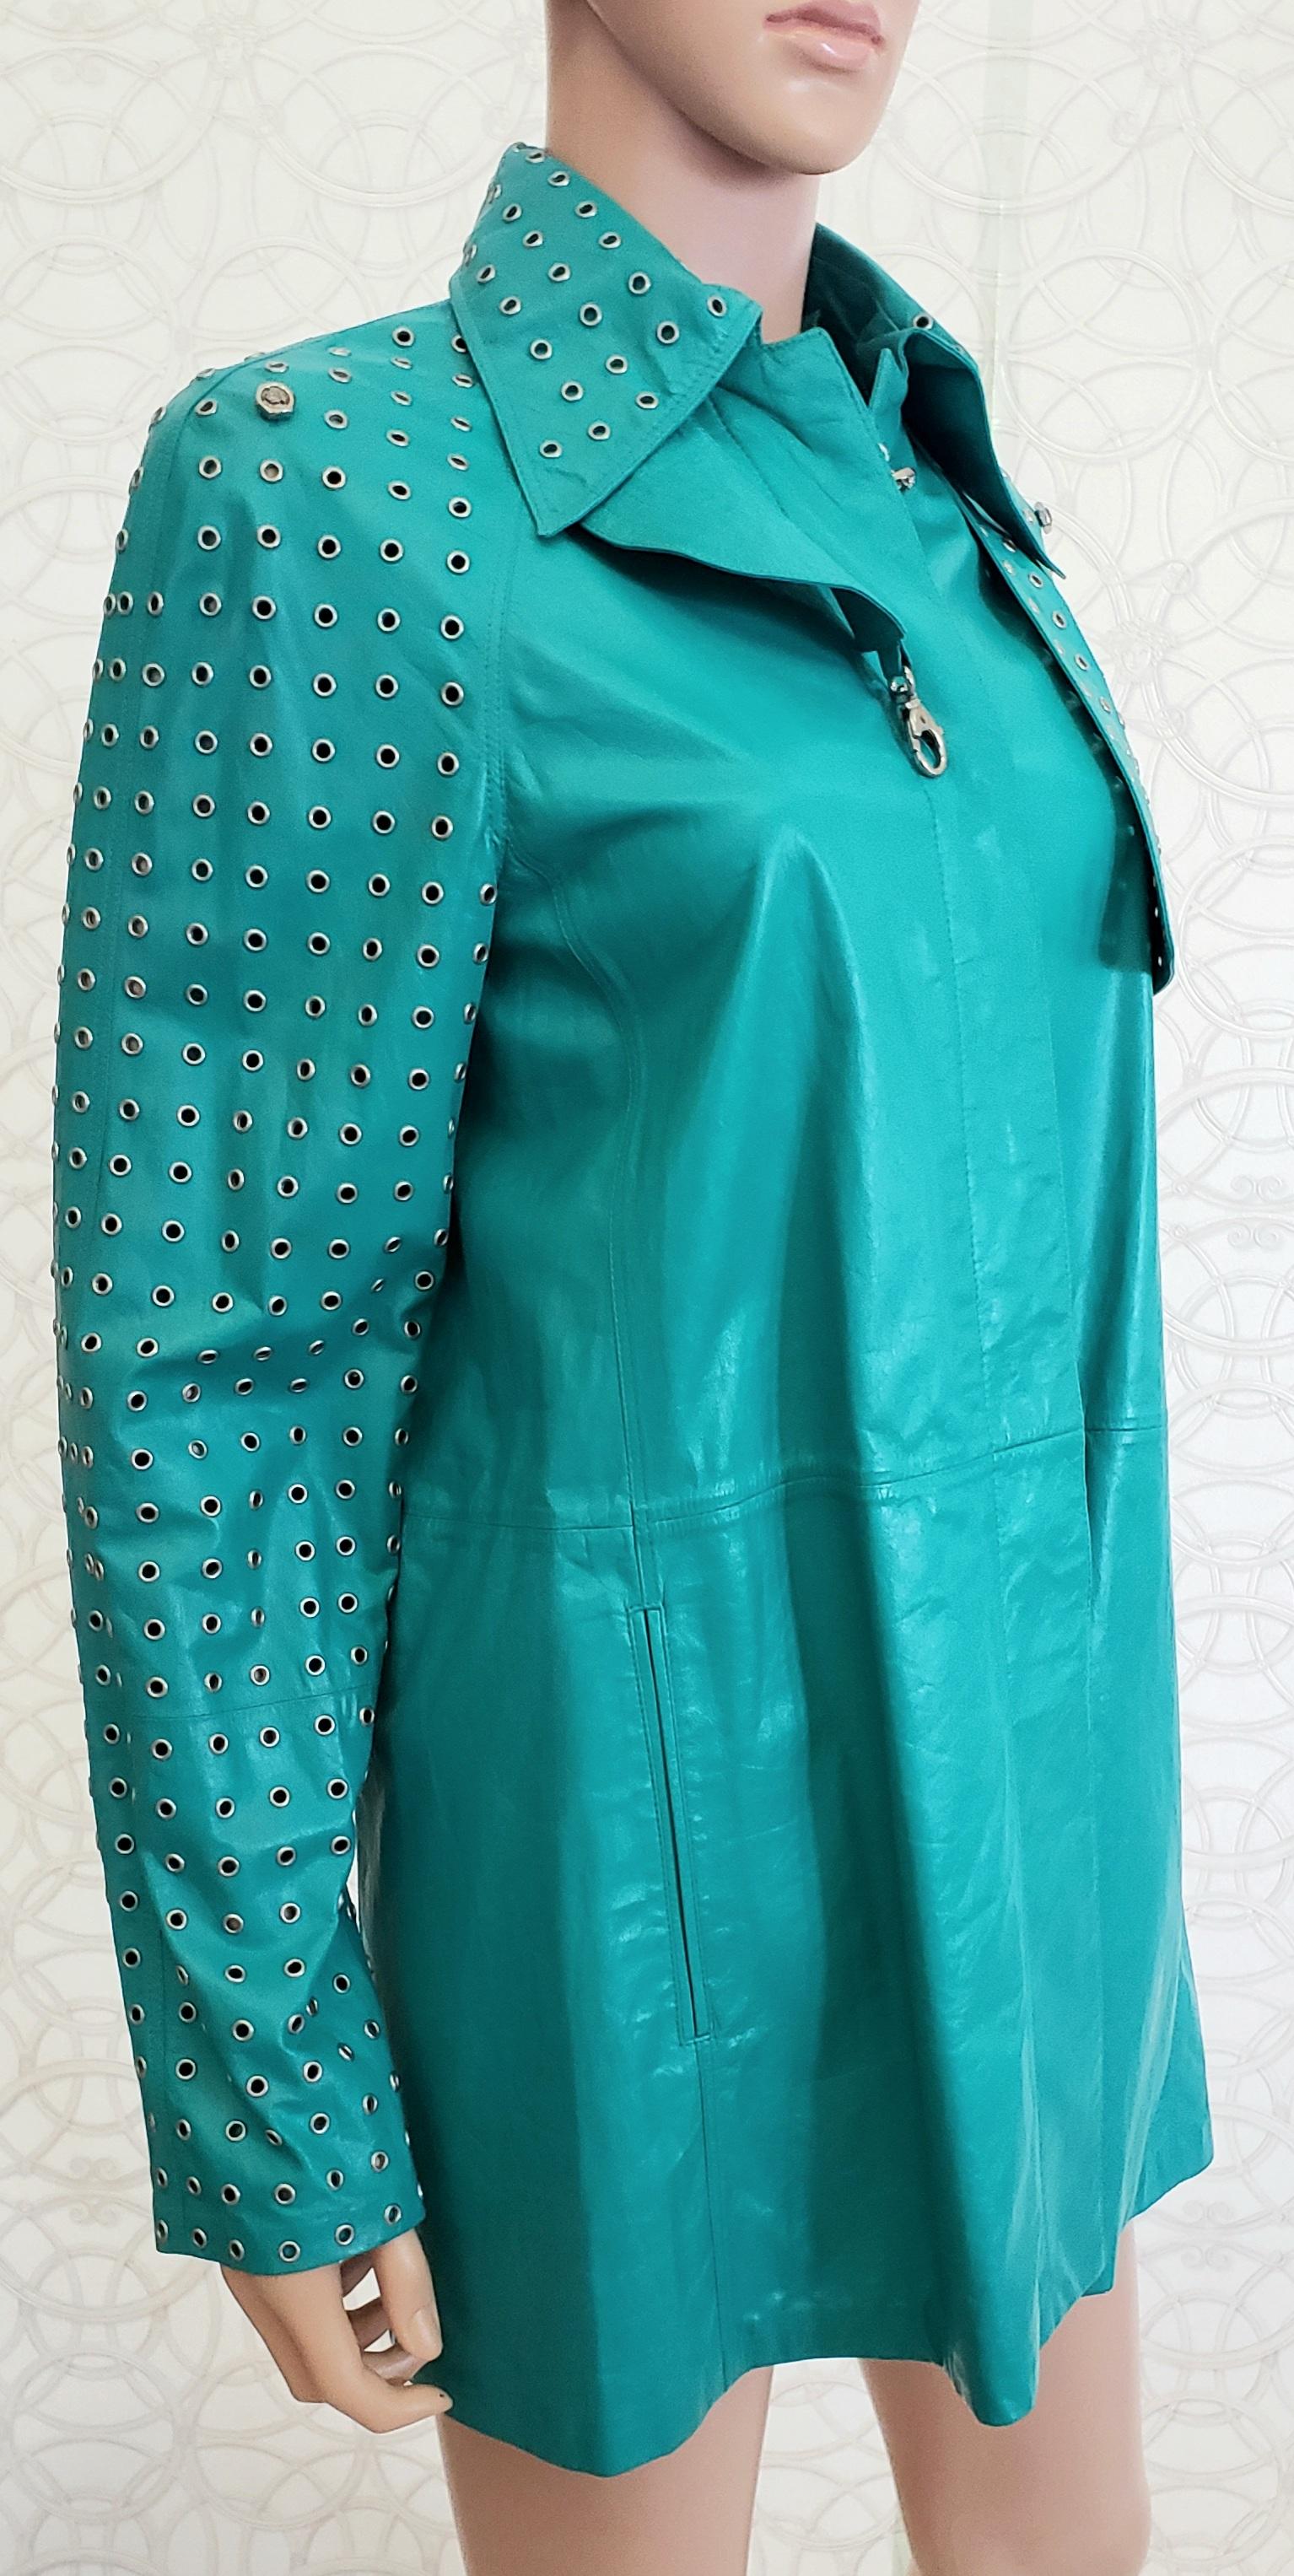 NEW GIANNI VERSACE EMERALD GREEN LEATHER JACKET with RIVETS Sz IT 40 - US 4/6 For Sale 4